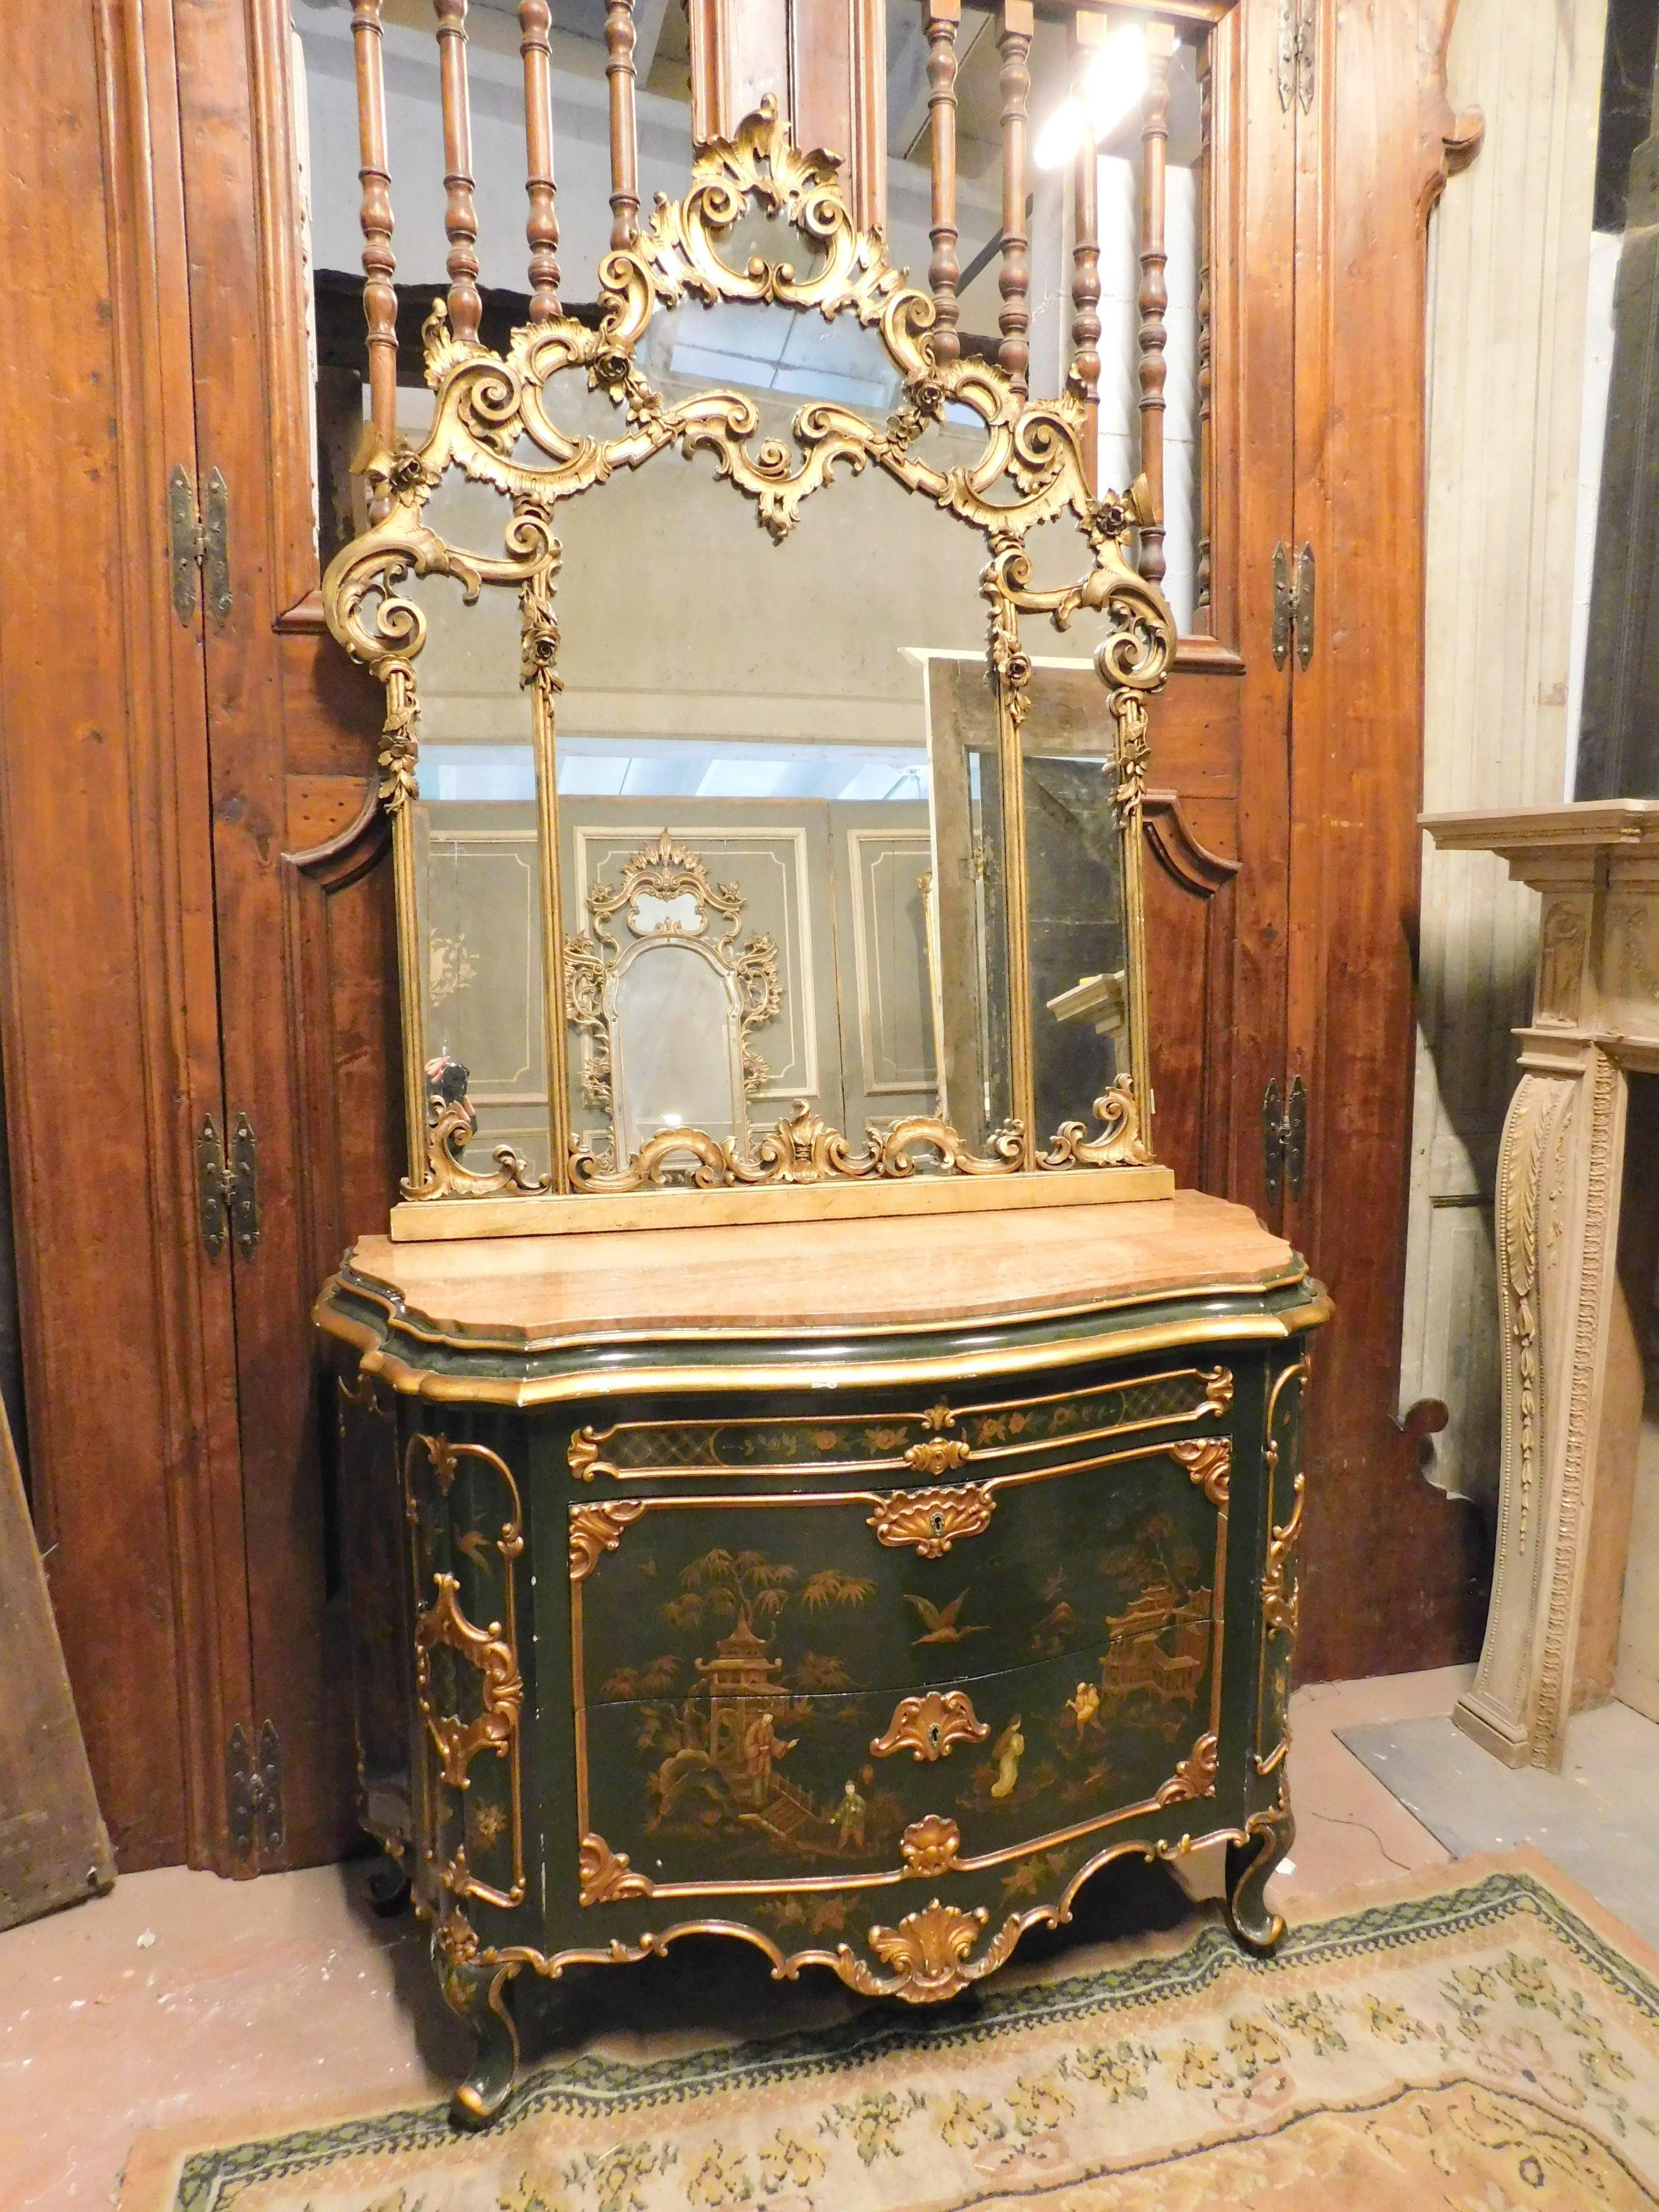 vintage dresser, old chest of drawers complete with wavy and gilded mirror, gilded base decorated with painted chinoiserie, built in the mid-20th century in Italy.
Chest of drawers measures w 125 x h 90 x d 55 cm, mirror measures w 125 x h 143 cm.
​